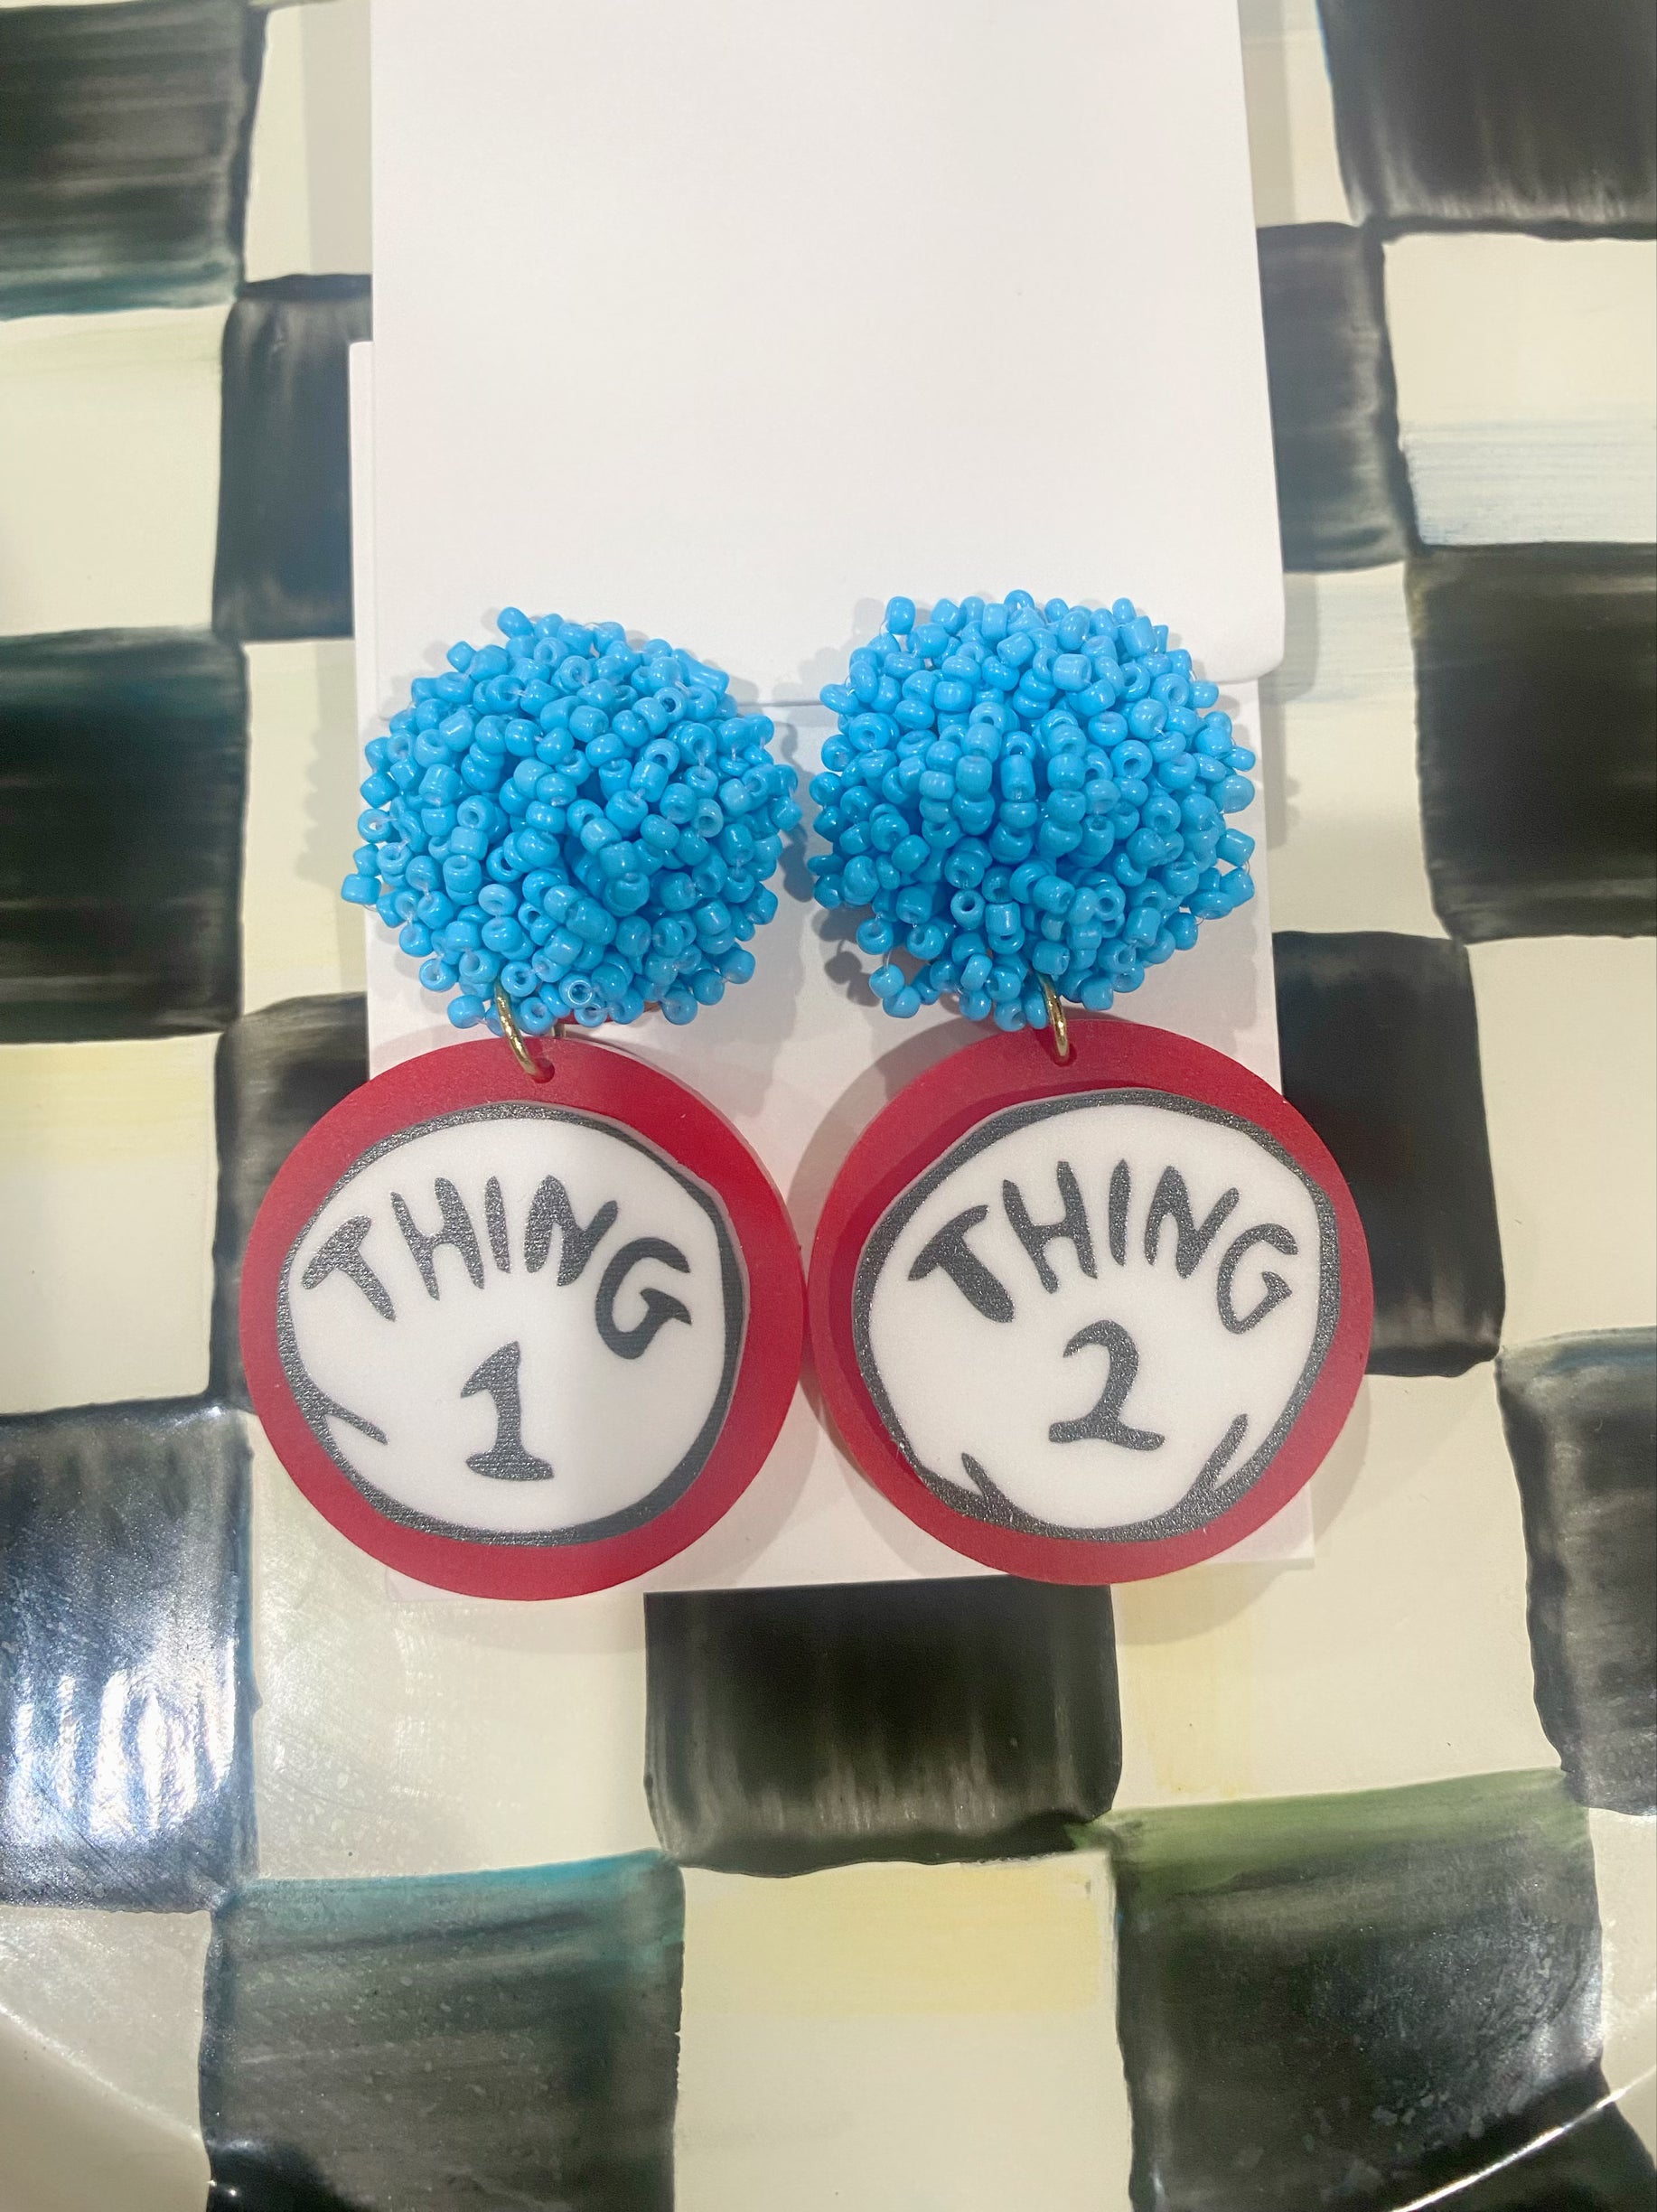 Thing 1 and Thing 2 earrings